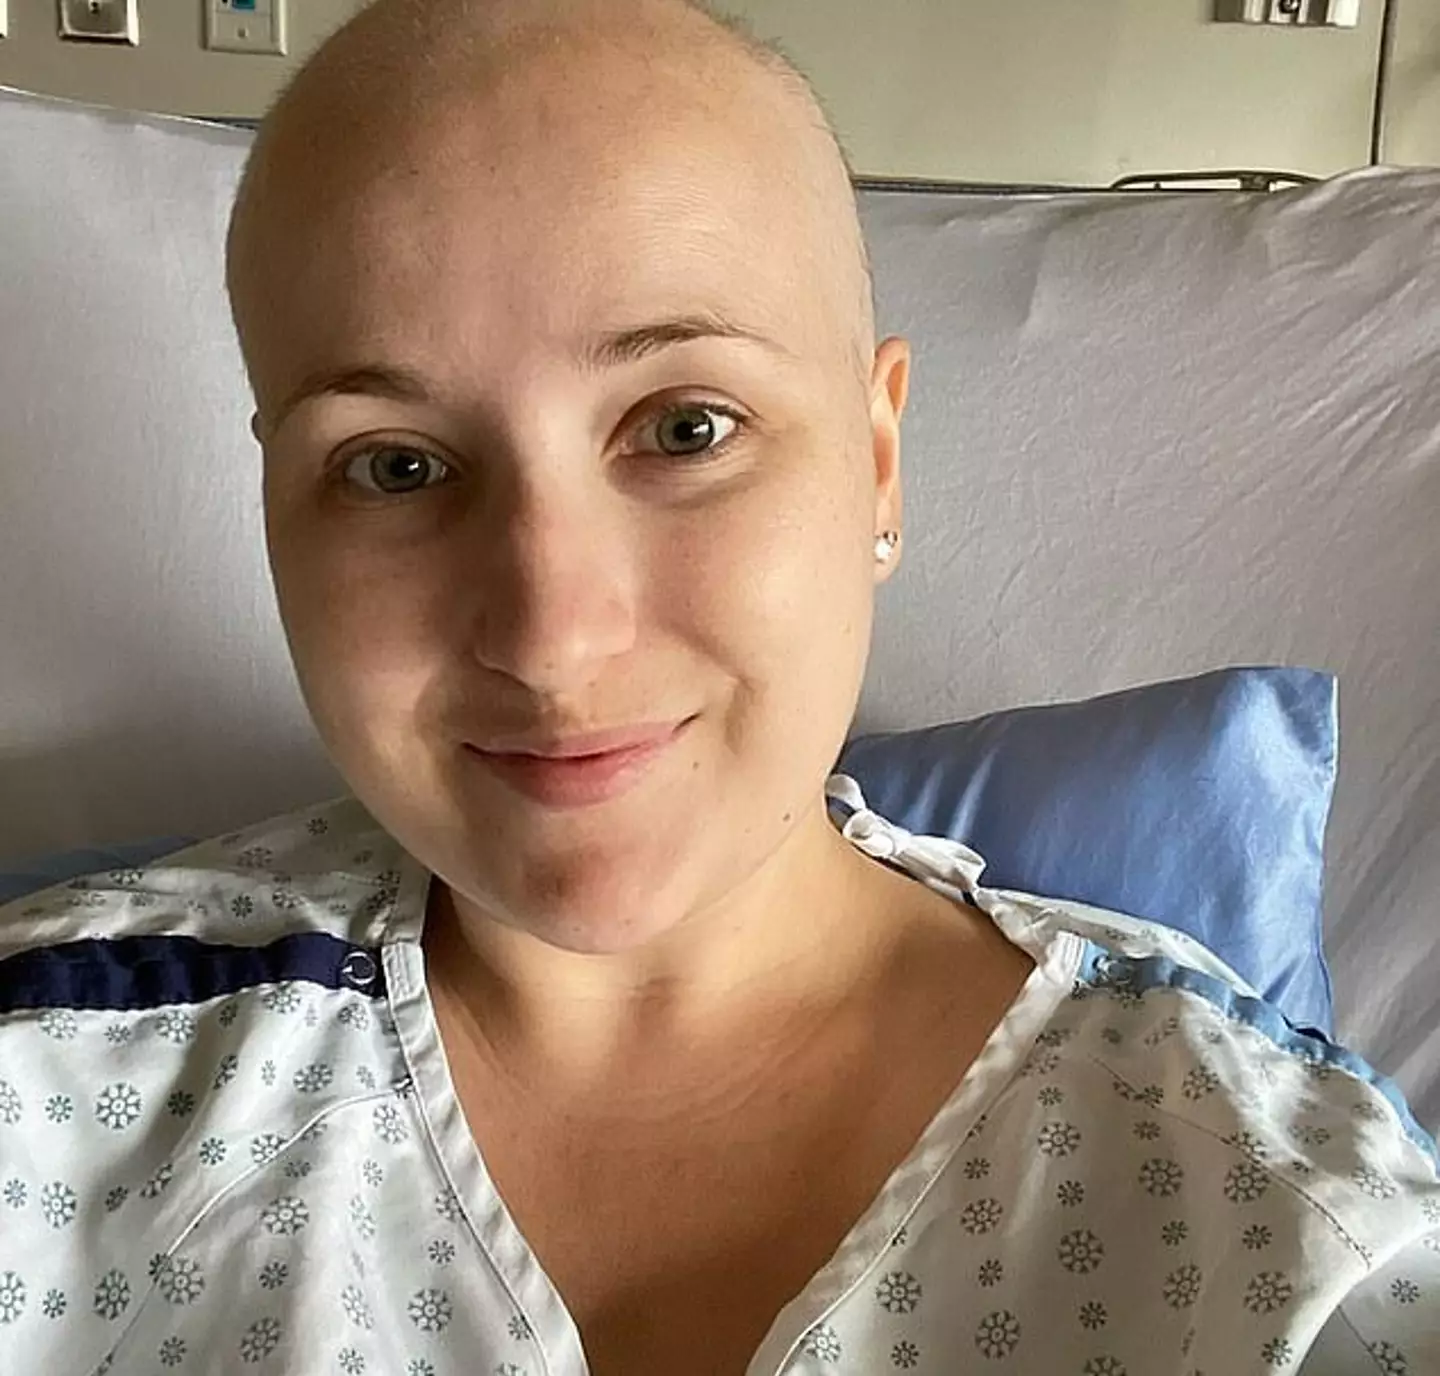 Kim posted videos about her daily life living with cancer and raising awareness. (Instagram/@cancerpatientmd)